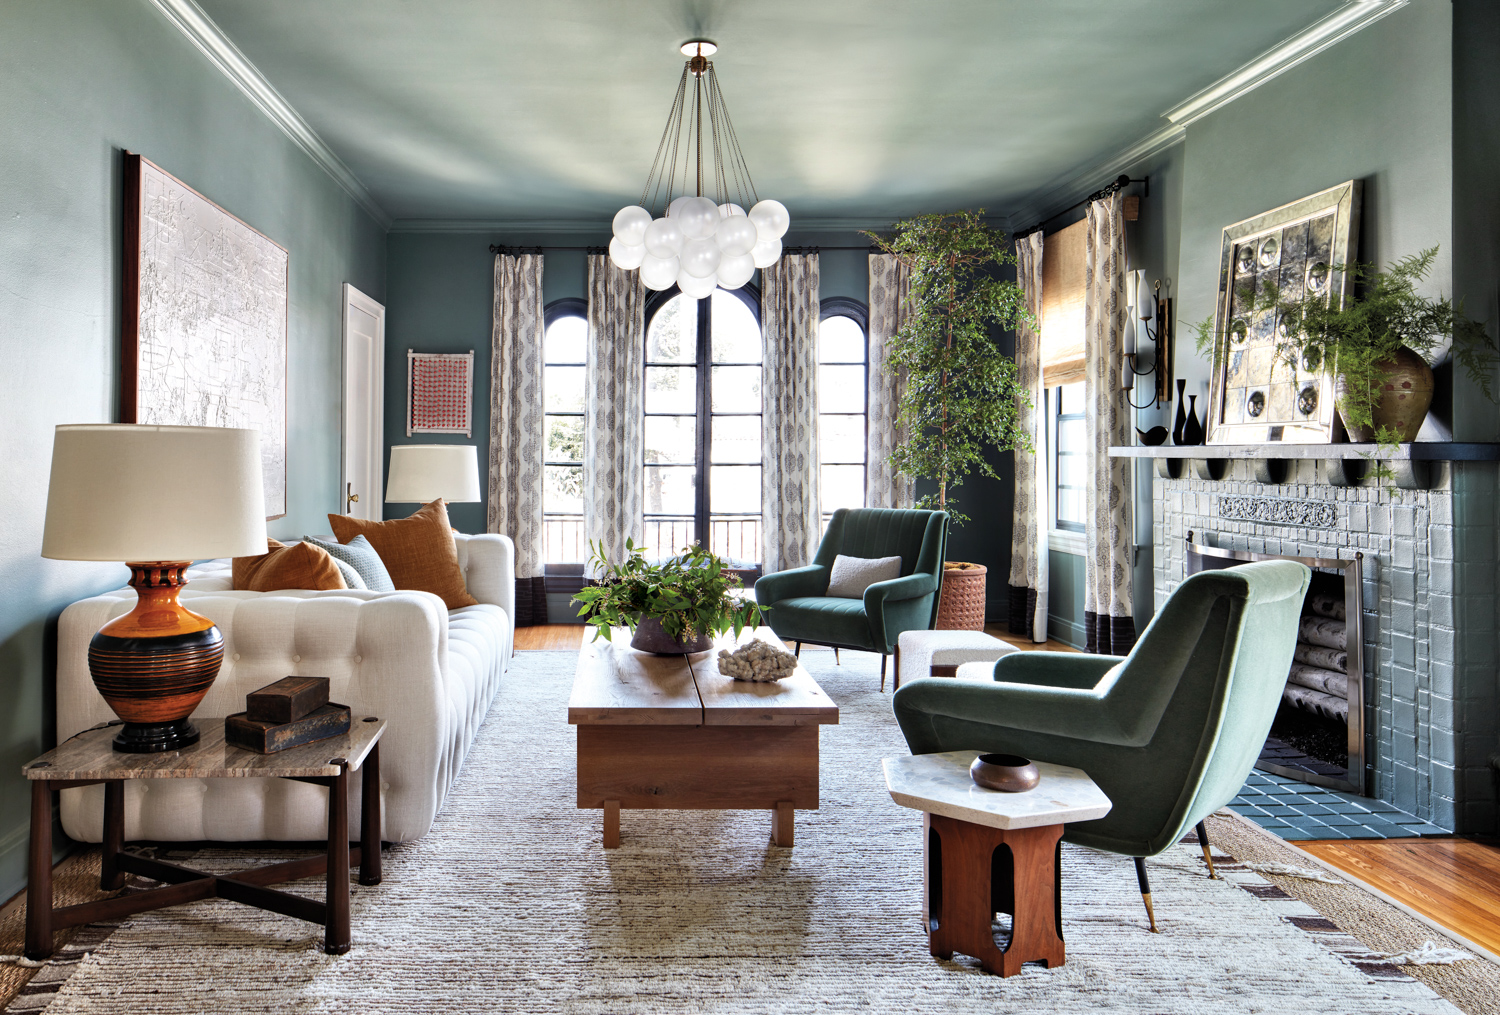 This Designer’s Home Is All Art Deco, Moody Hues and Modern Vibes